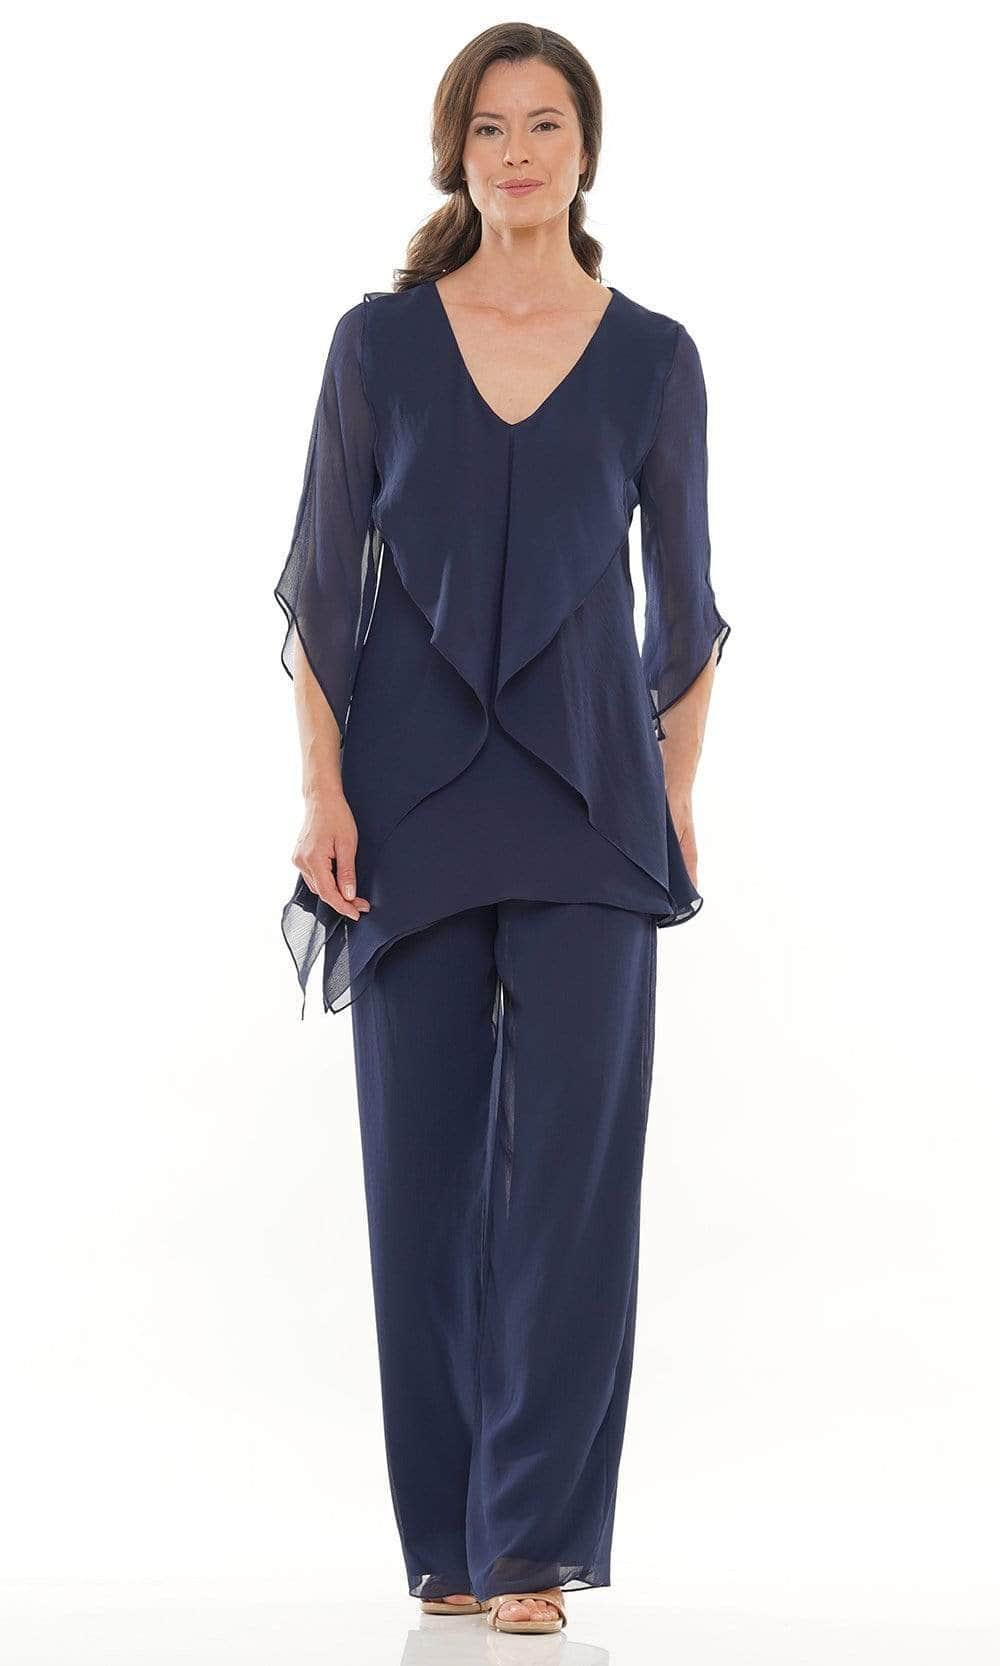 Marsoni by Colors - Ruffle Chiffon Pantsuit M308 - 2 pc Navy In Size 22 and 24 Available CCSALE